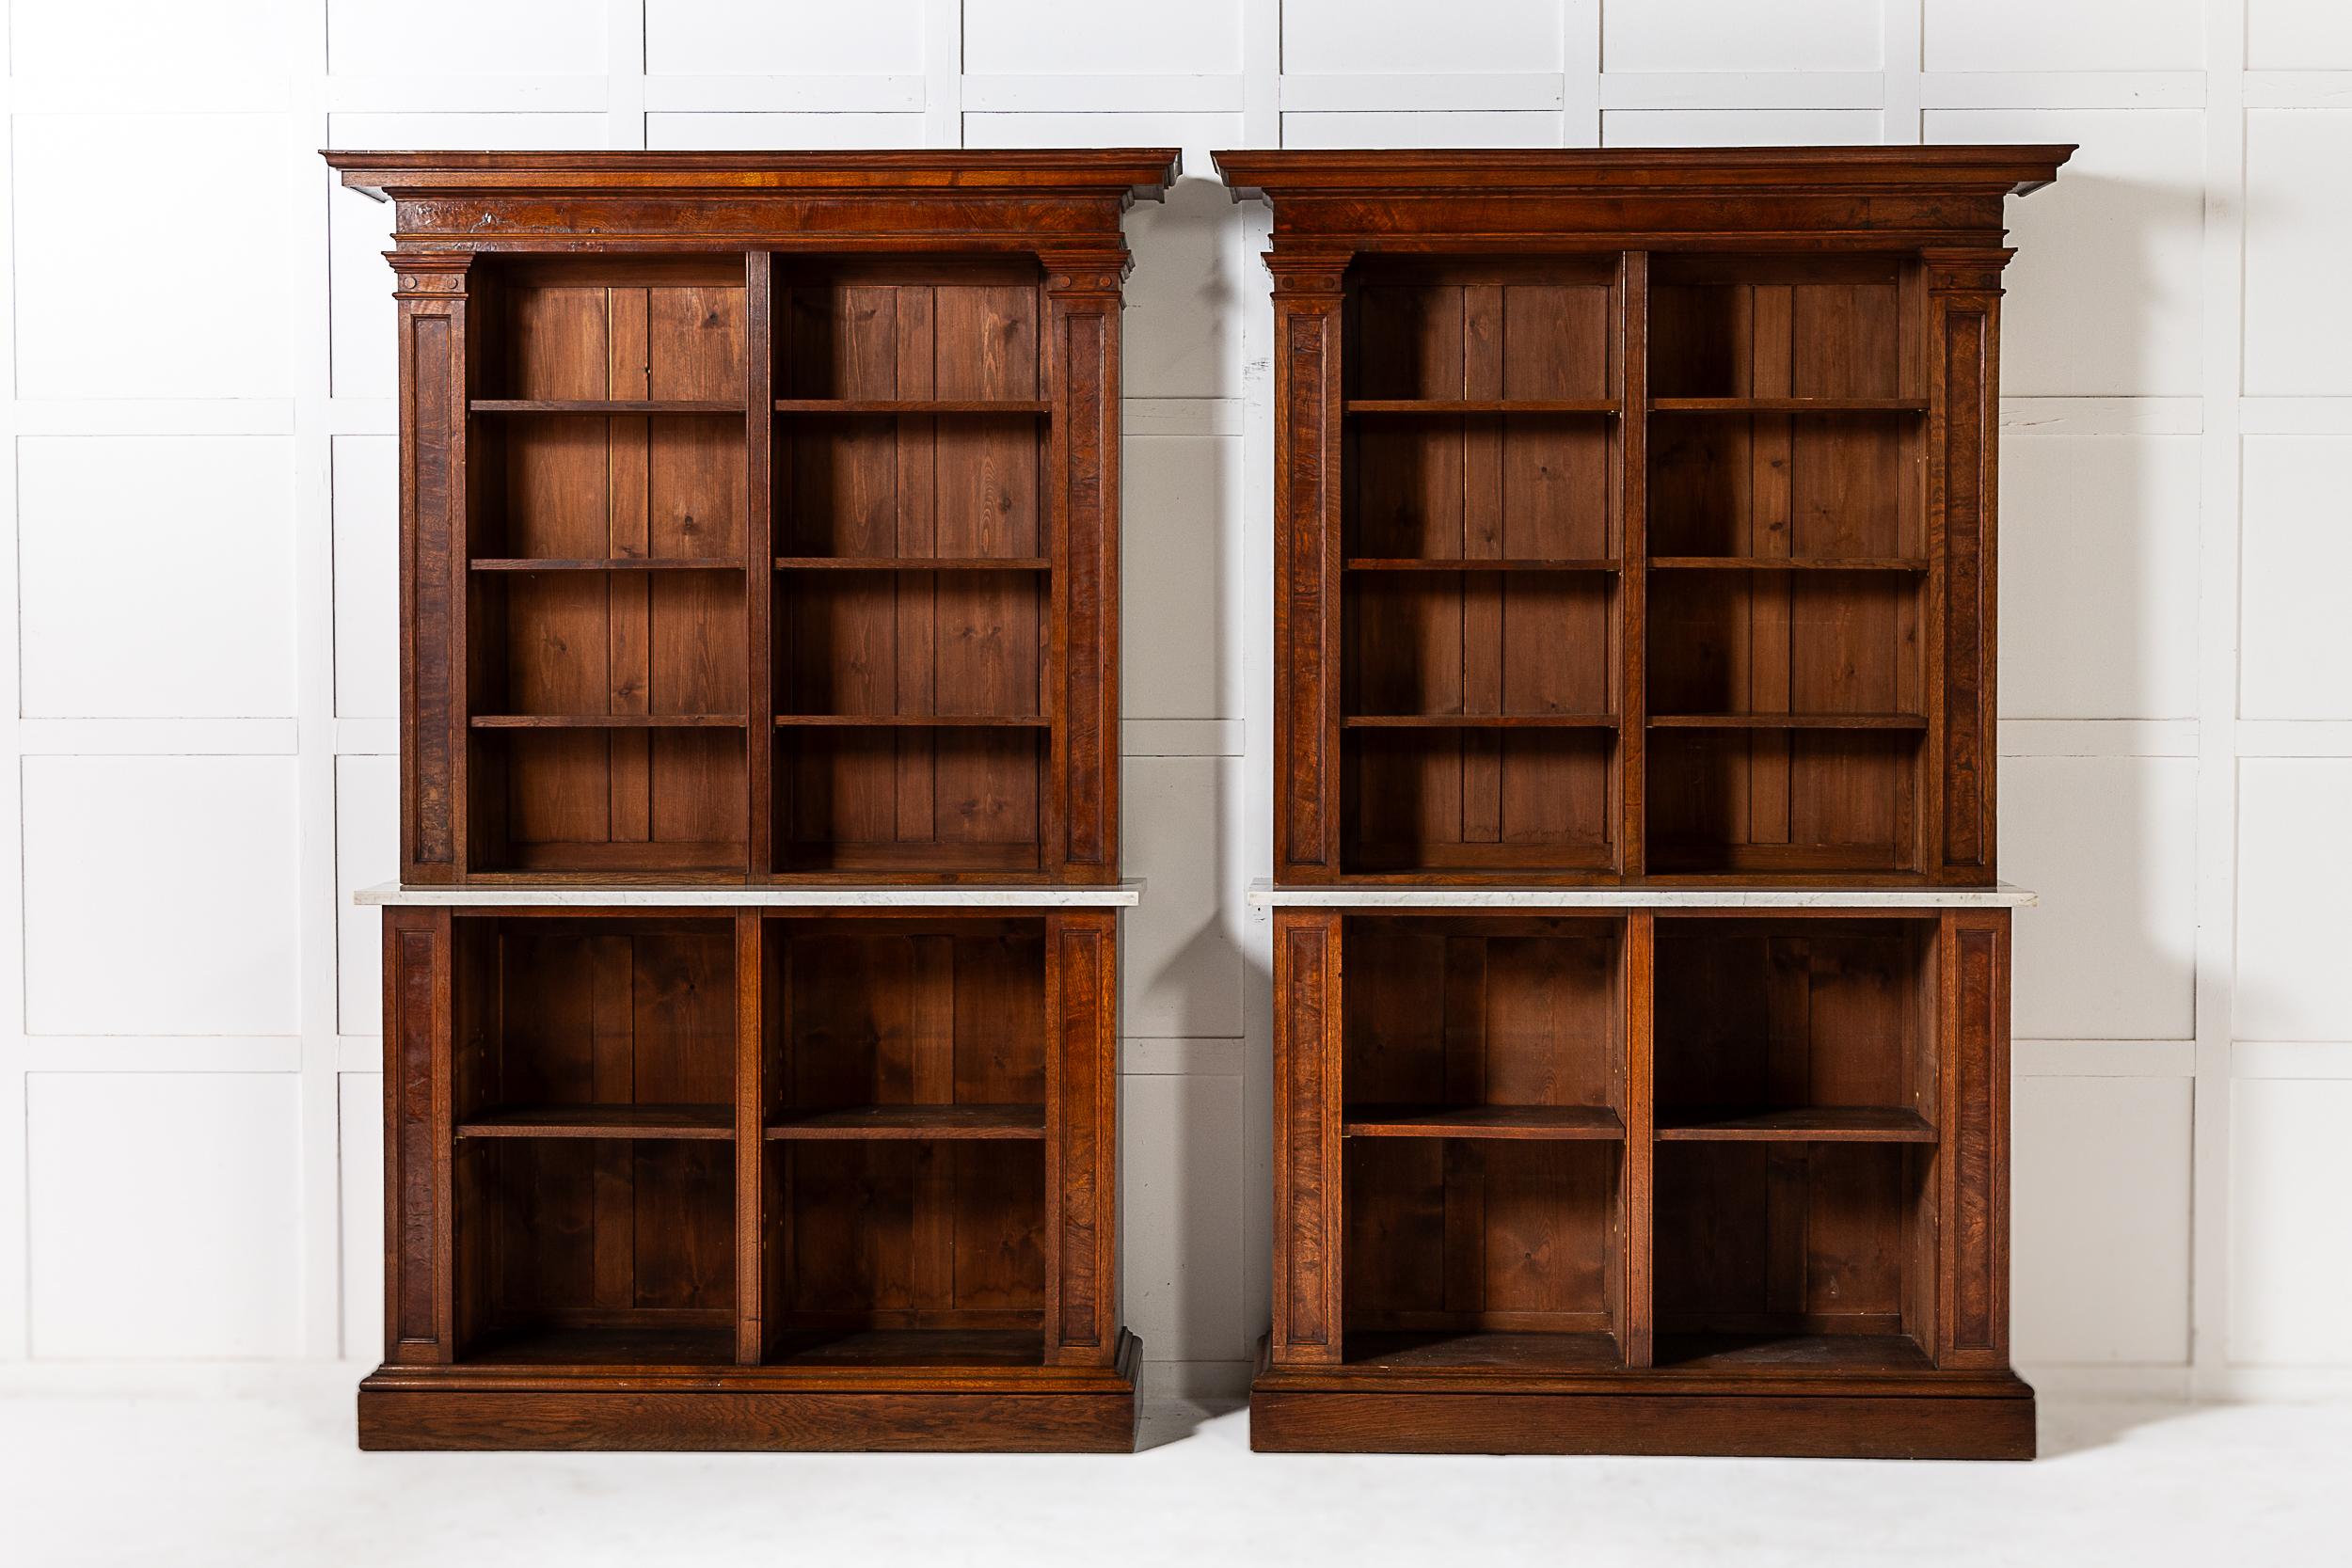 A Pair of Exceptionally Fine Pollard Oak and Oak Display Cabinets or Bookcases of Pronounced Architectural Form.

These lovely cabinets bear the hallmarks of architect designed furniture in that they appear to be unique designs produced for a single